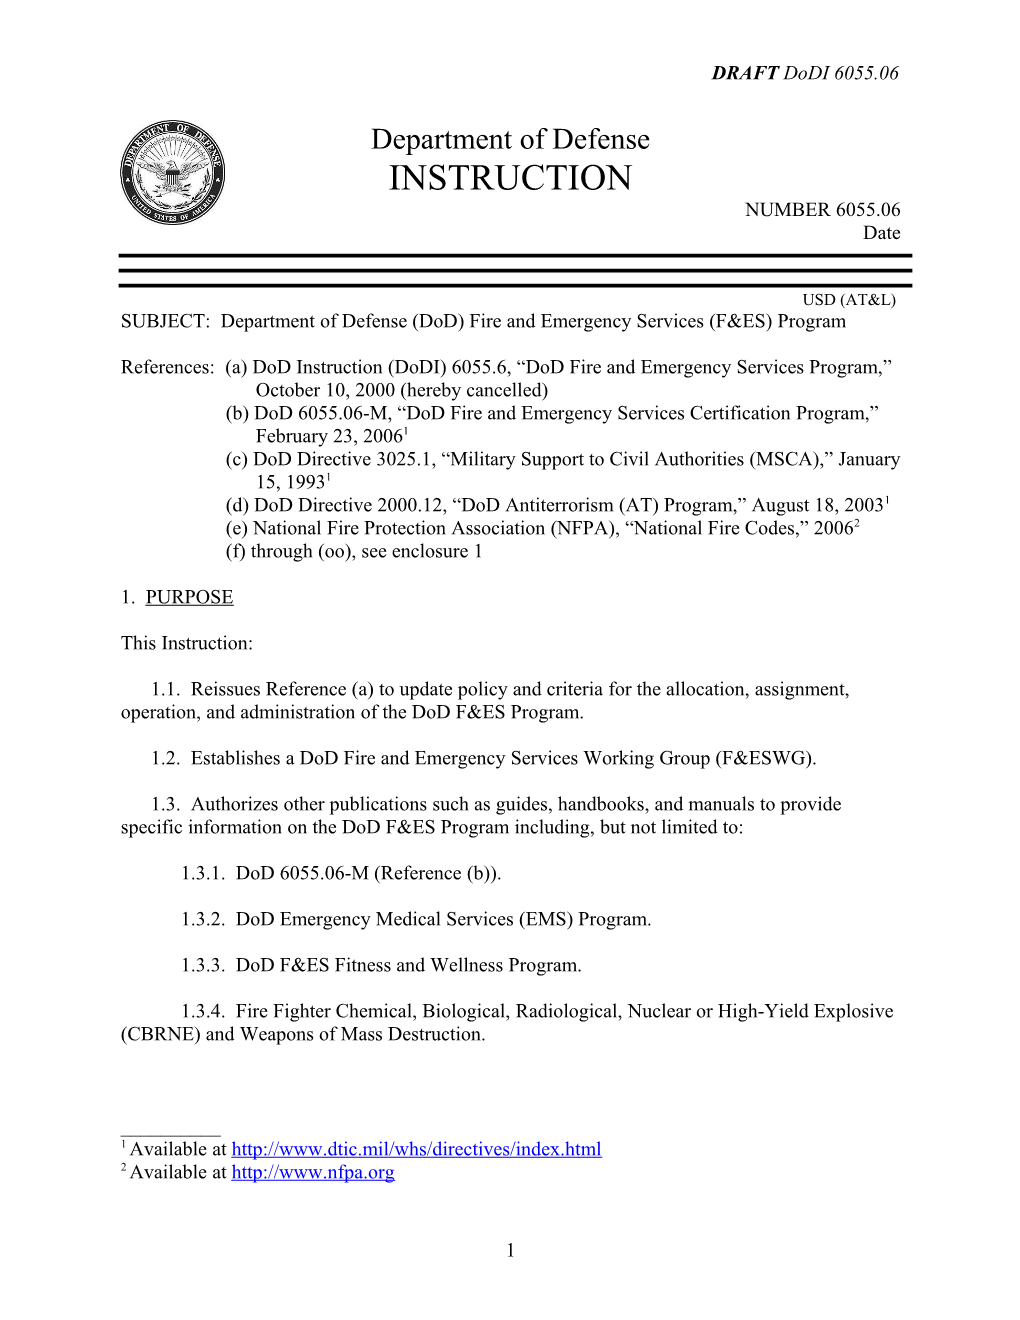 SUBJECT: Department of Defense (Dod) Fire and Emergency Services (F&ES) Program